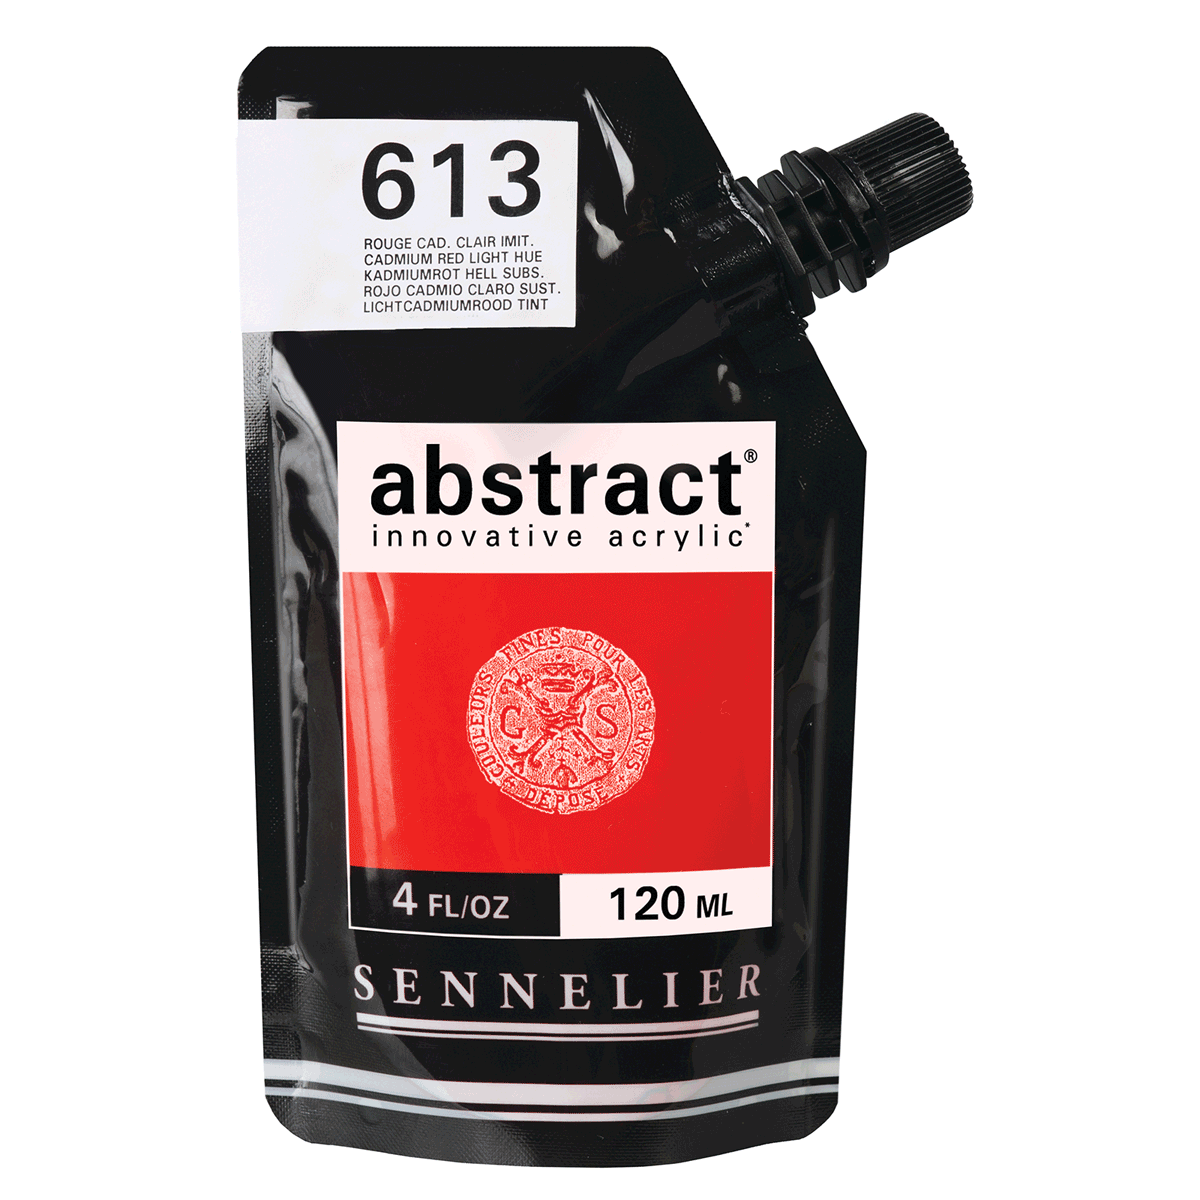 Abstract Acrylic Pouch - Satin 613 Cadmium Red Light Hue 120ml